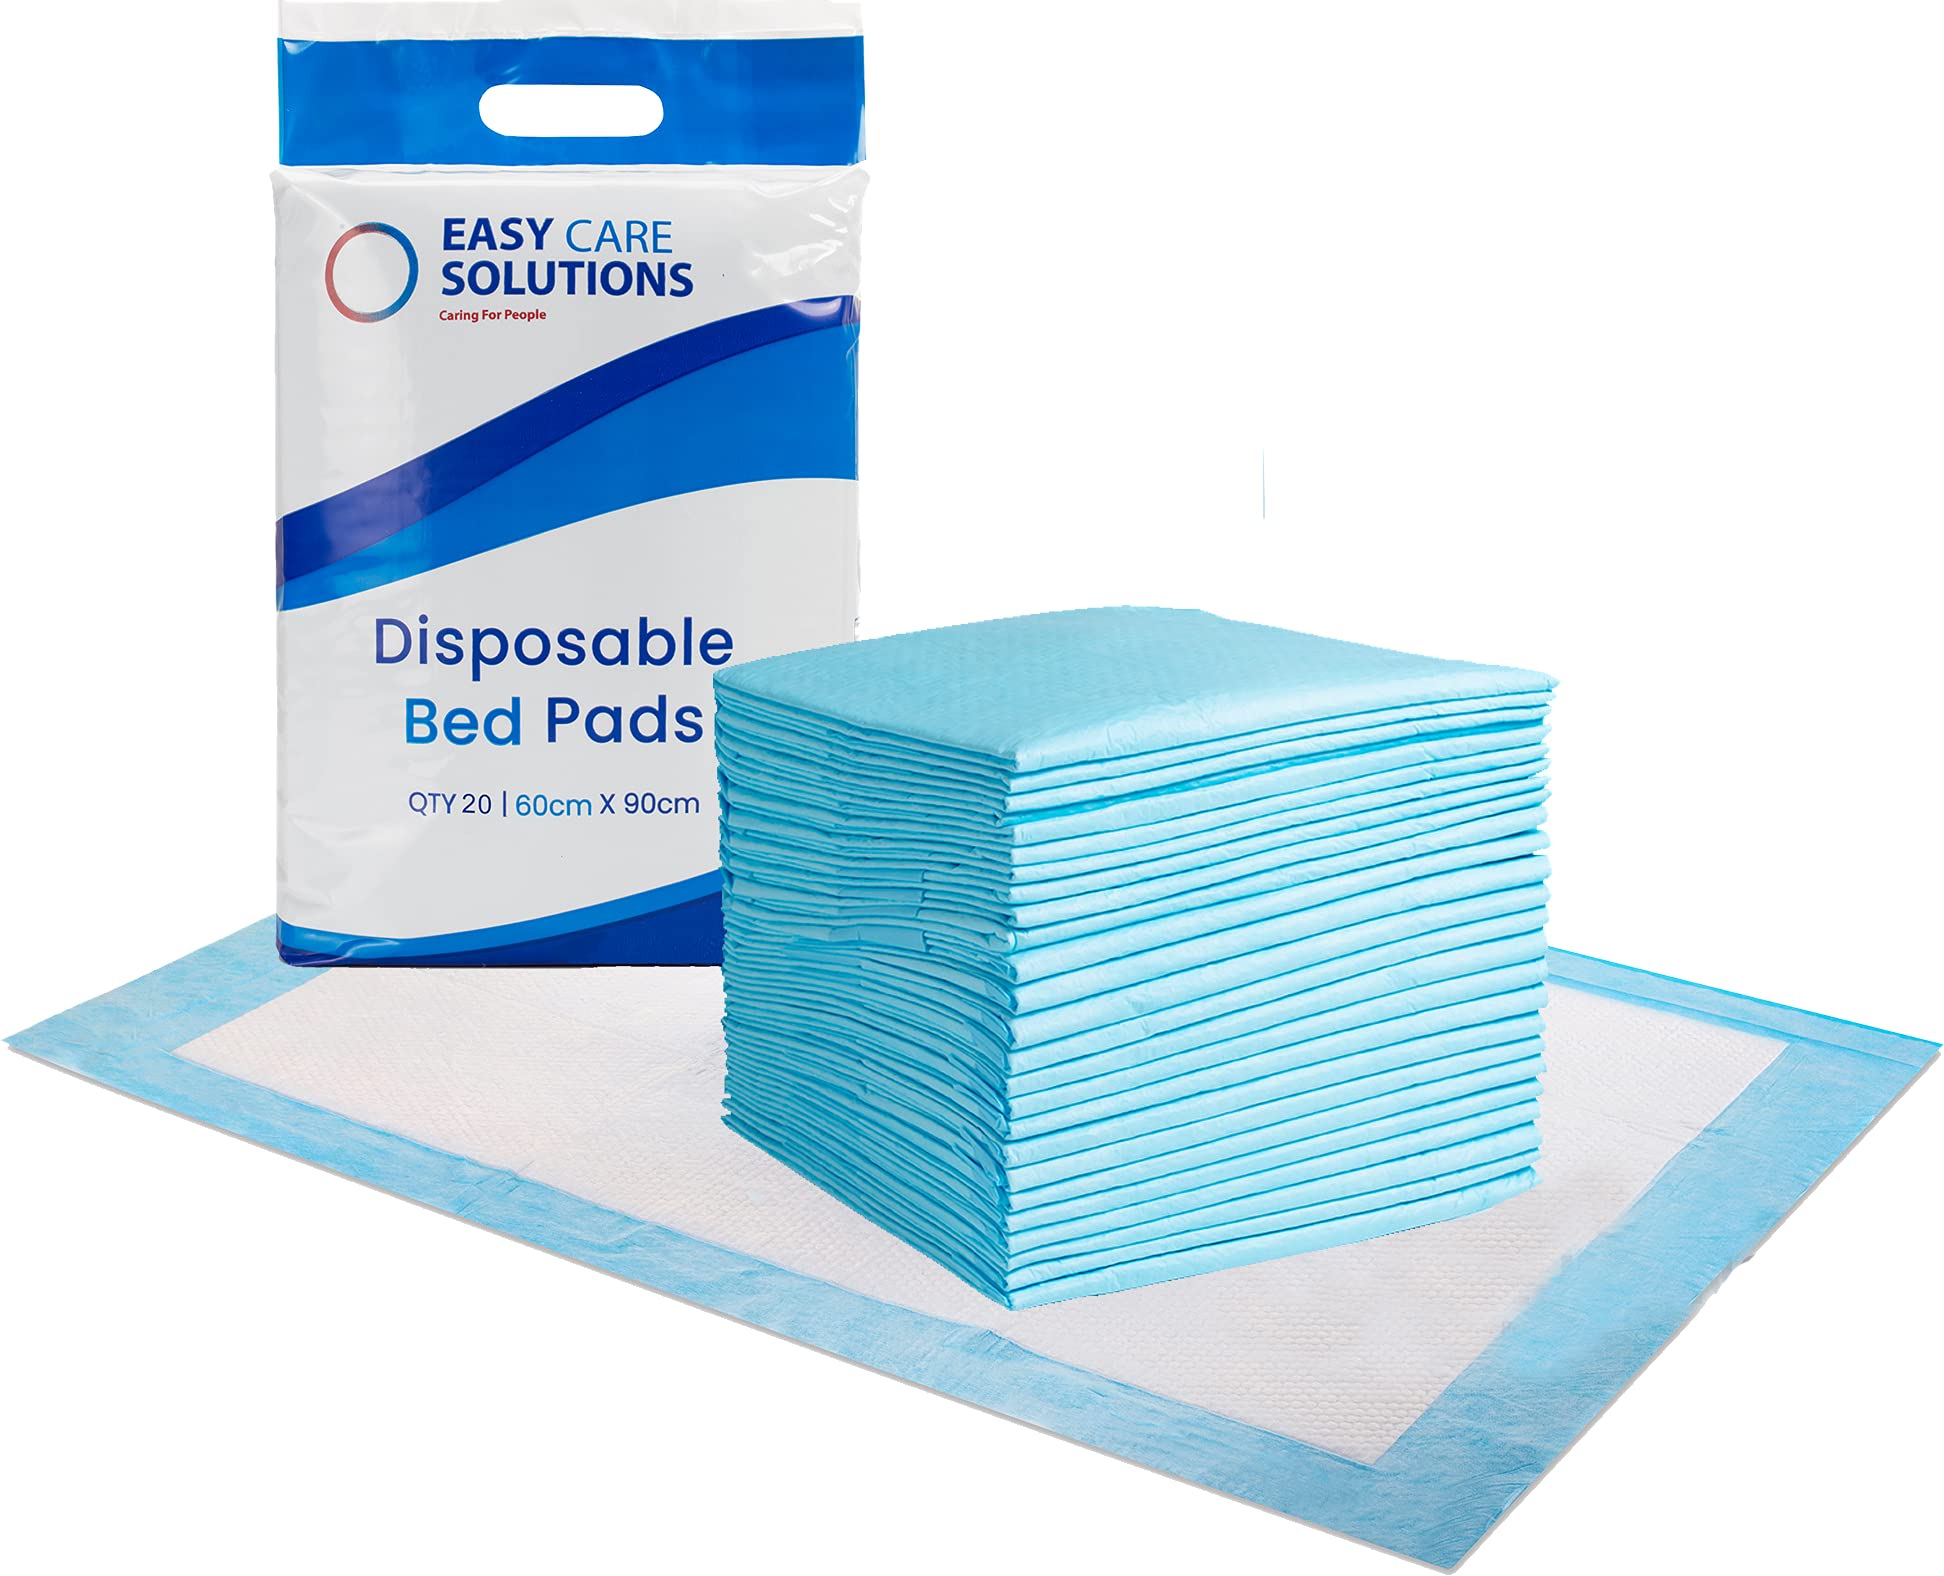 80 x Easy Care Solutions 60 x 90 cm | Disposable Incontinence Bed Pads, Underpads, Bed Mats, Mattress Protectors, Incontinence Pads, Waterproof Bed Sheets for Babies, Children & Adults | 4 Packs of 20